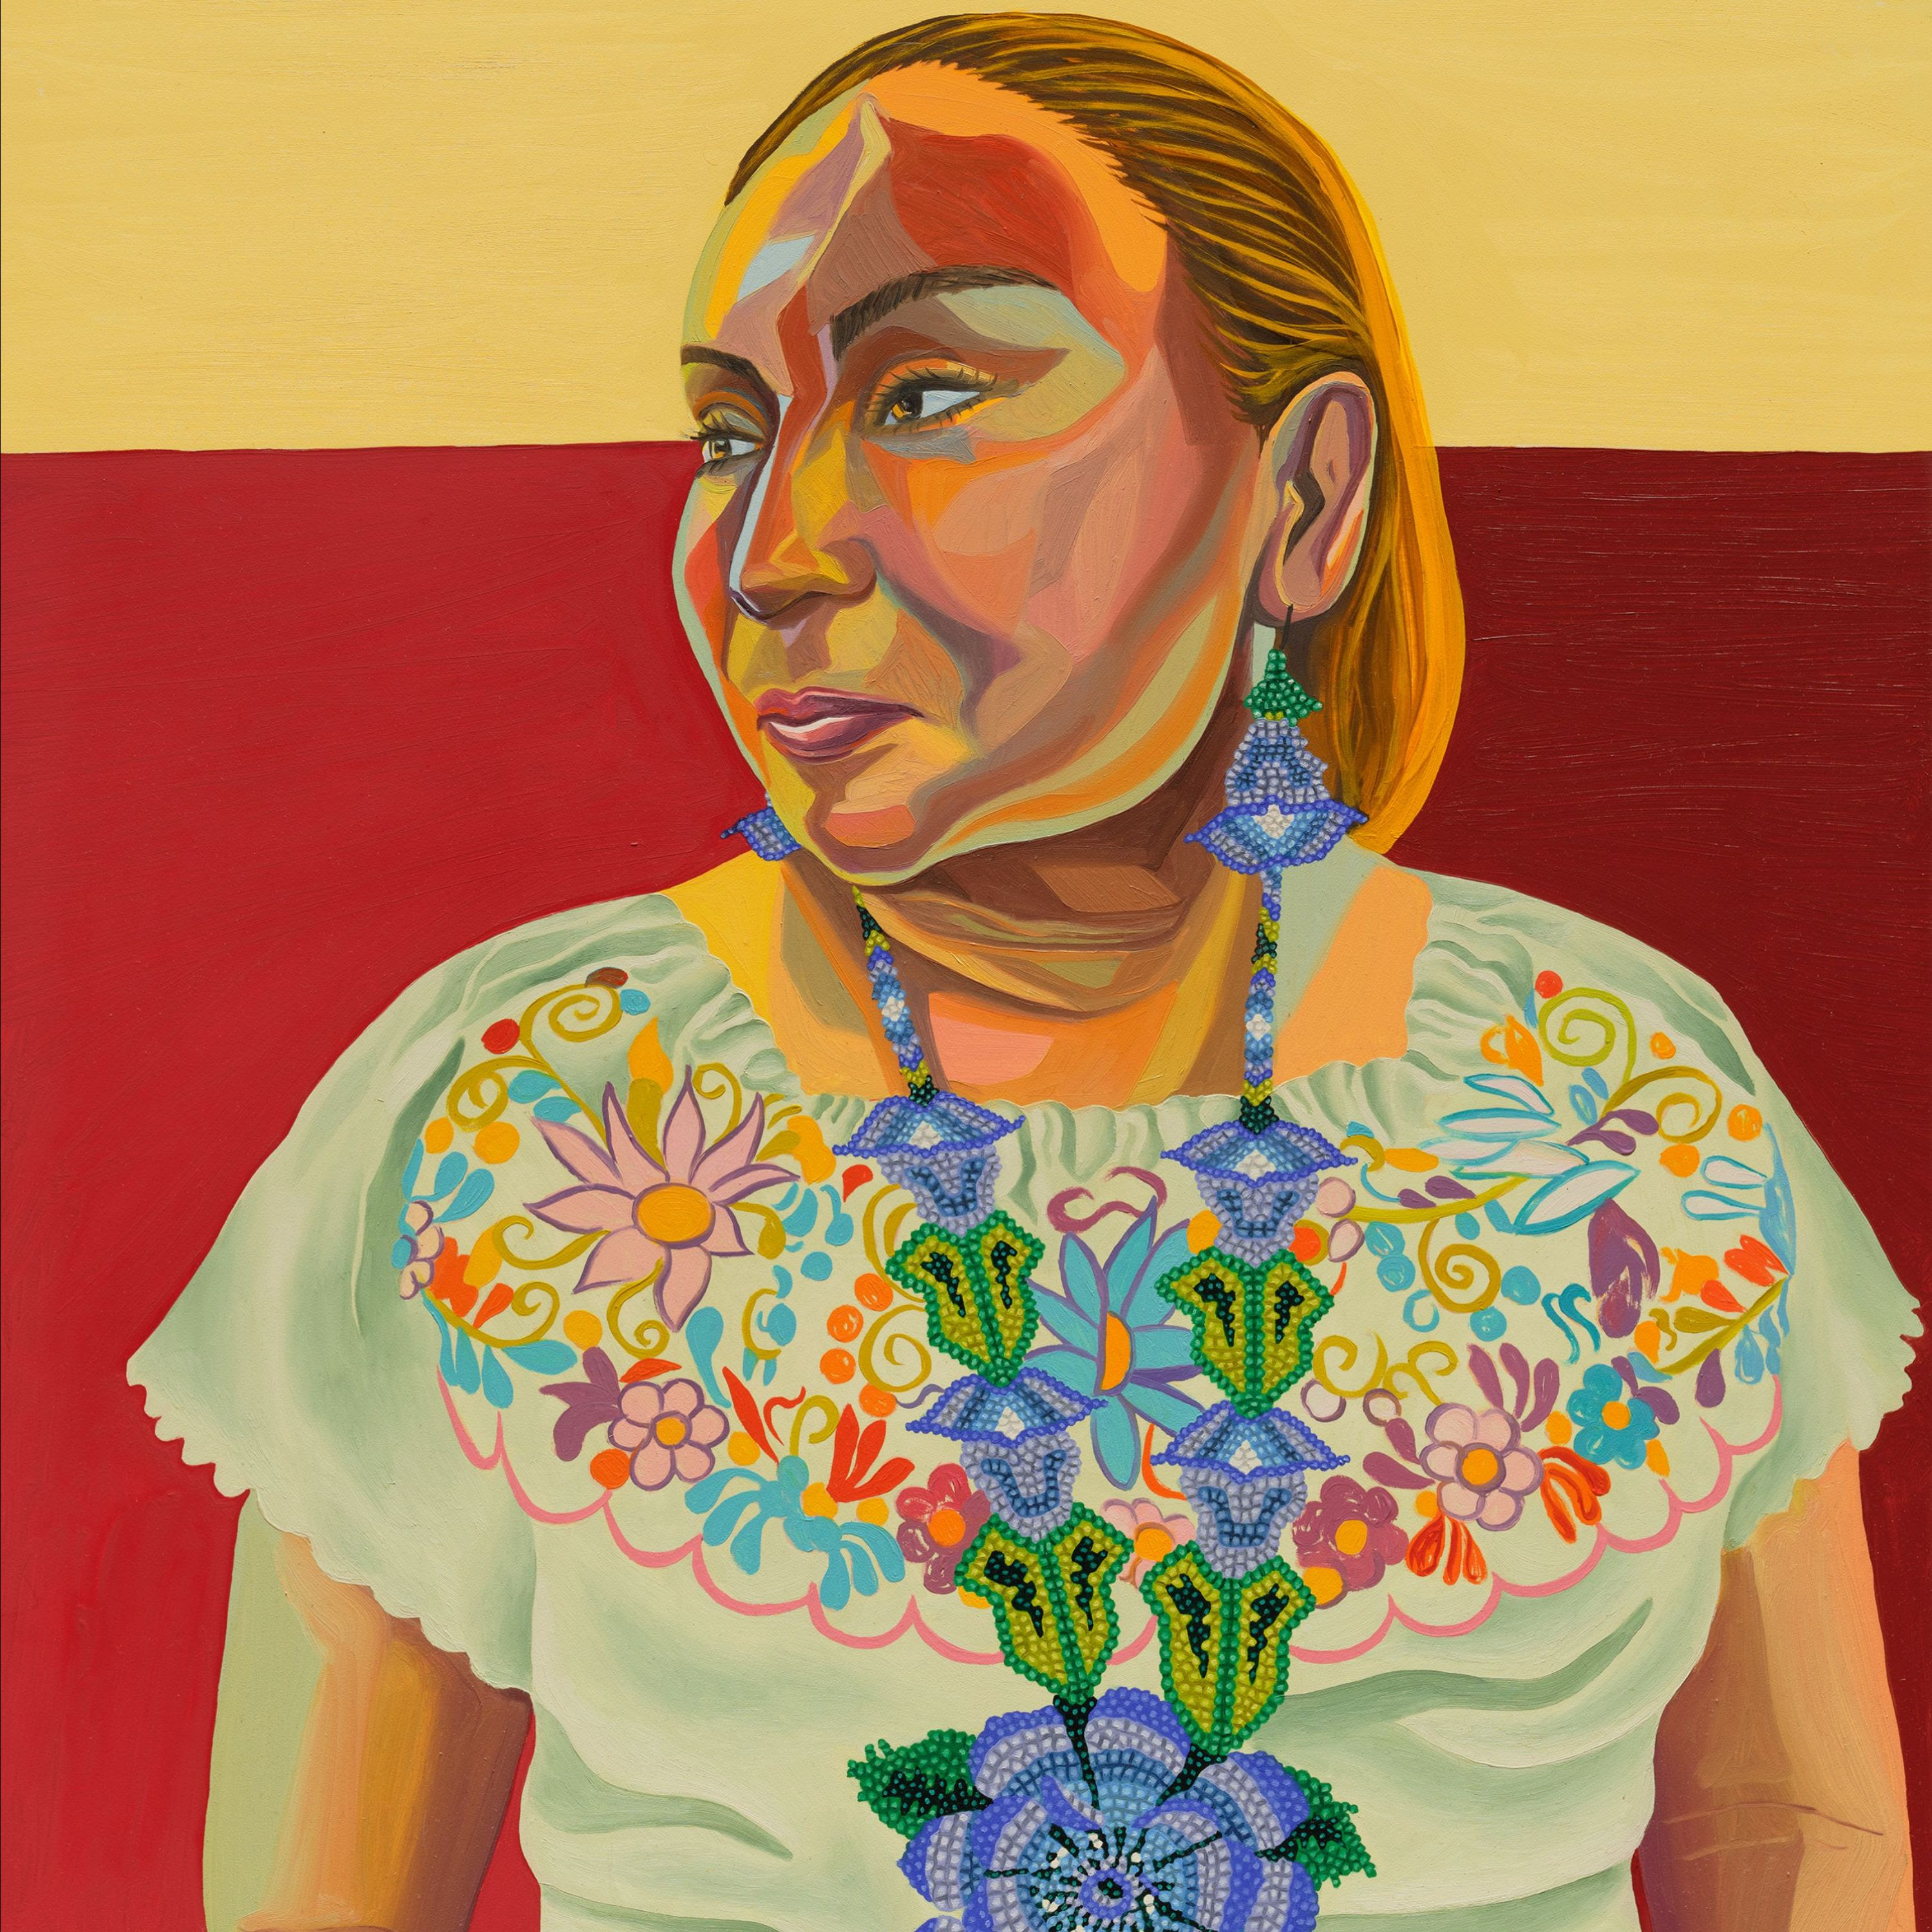 A painting of Carmen by Aliza Nisenbaum. Carmen is posing against a cream and red backdrop. She has blond hair and is wearing a beaded necklace and earrings in the shape of purple flowers. She is wearing a white dress with colorful floral patterns around the collar.